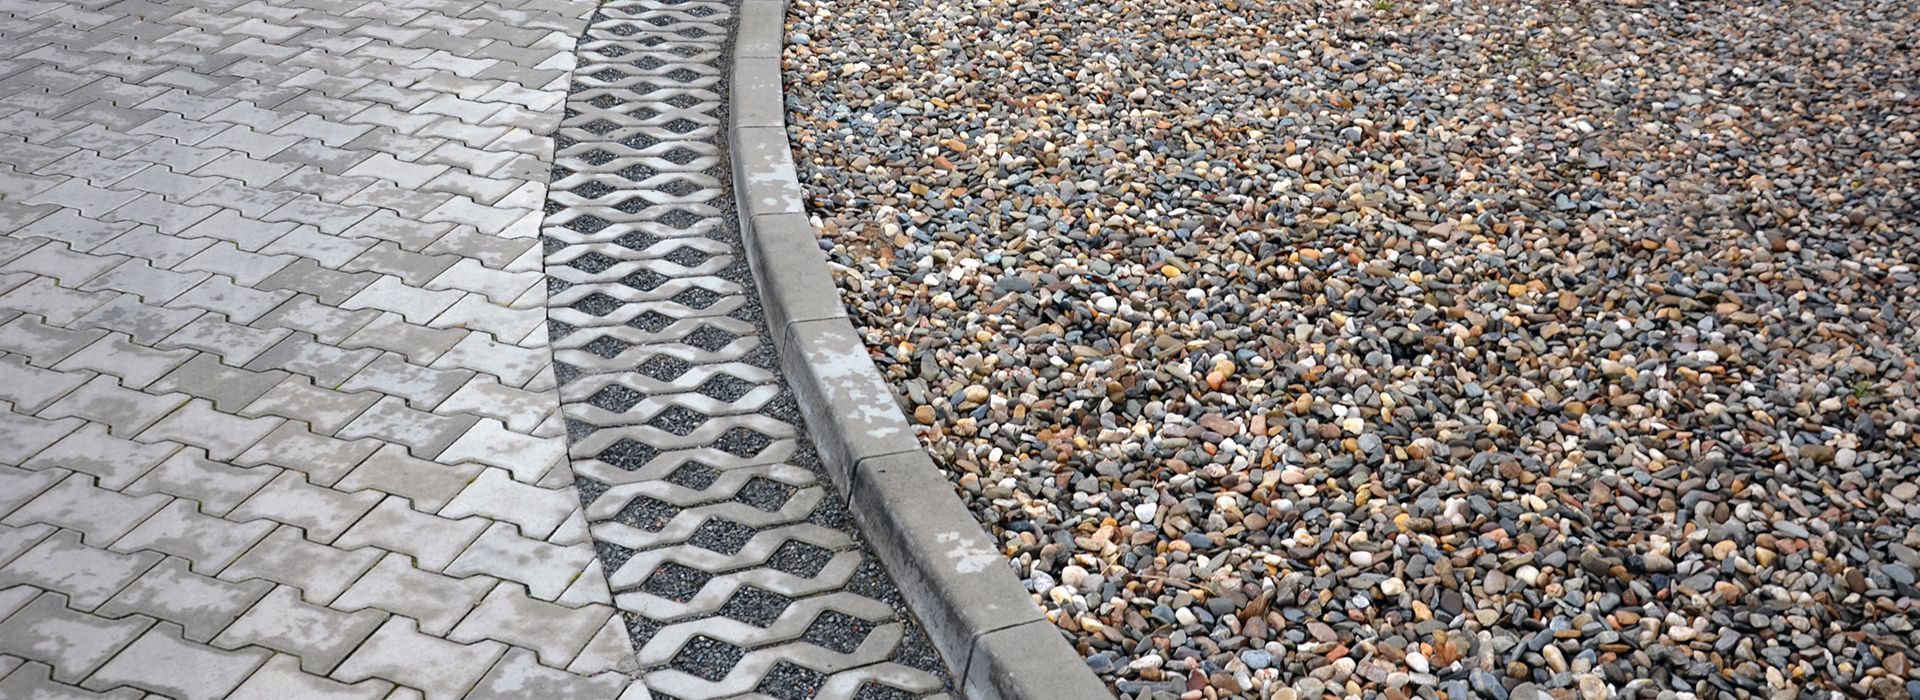 A Review of Residential Hardscape Surfaces – GRAVEL & PAVERS 